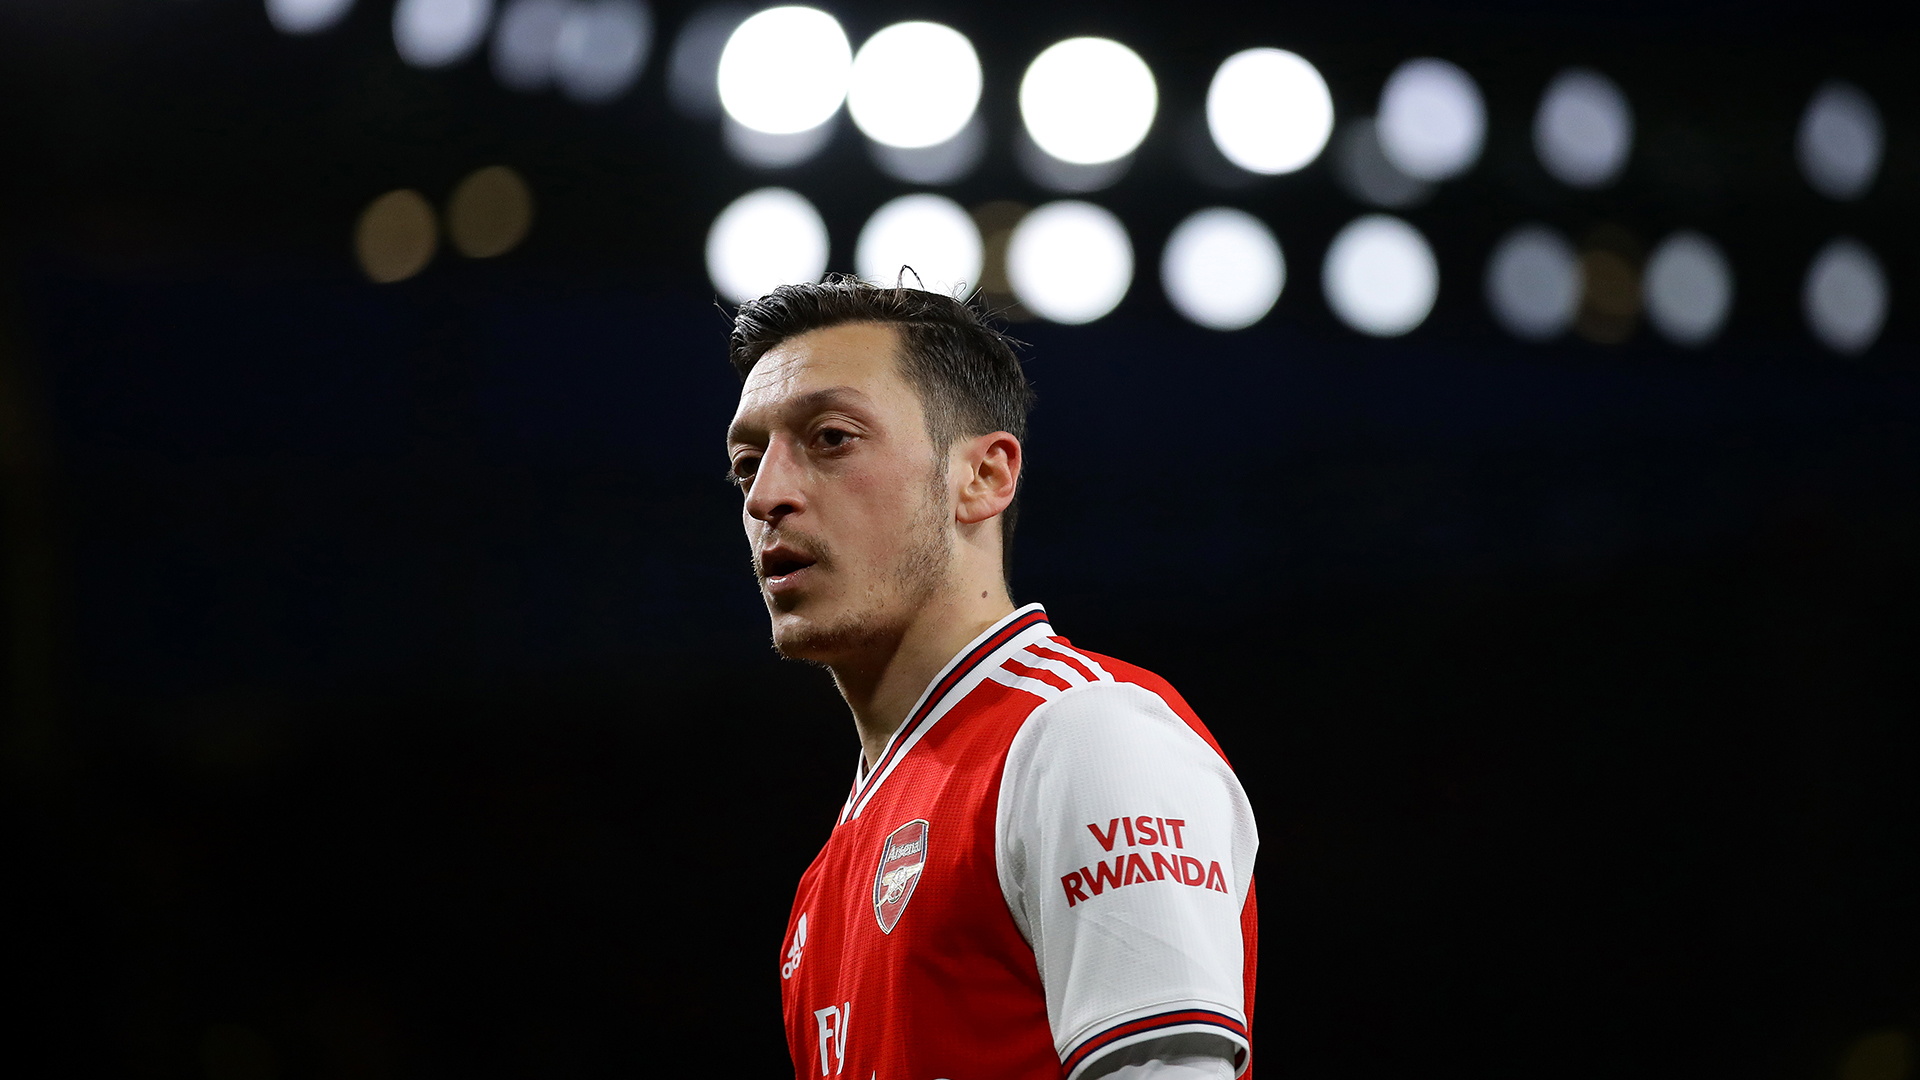 Arsenal outcast Ozil wishes he could help Gunners through difficult period